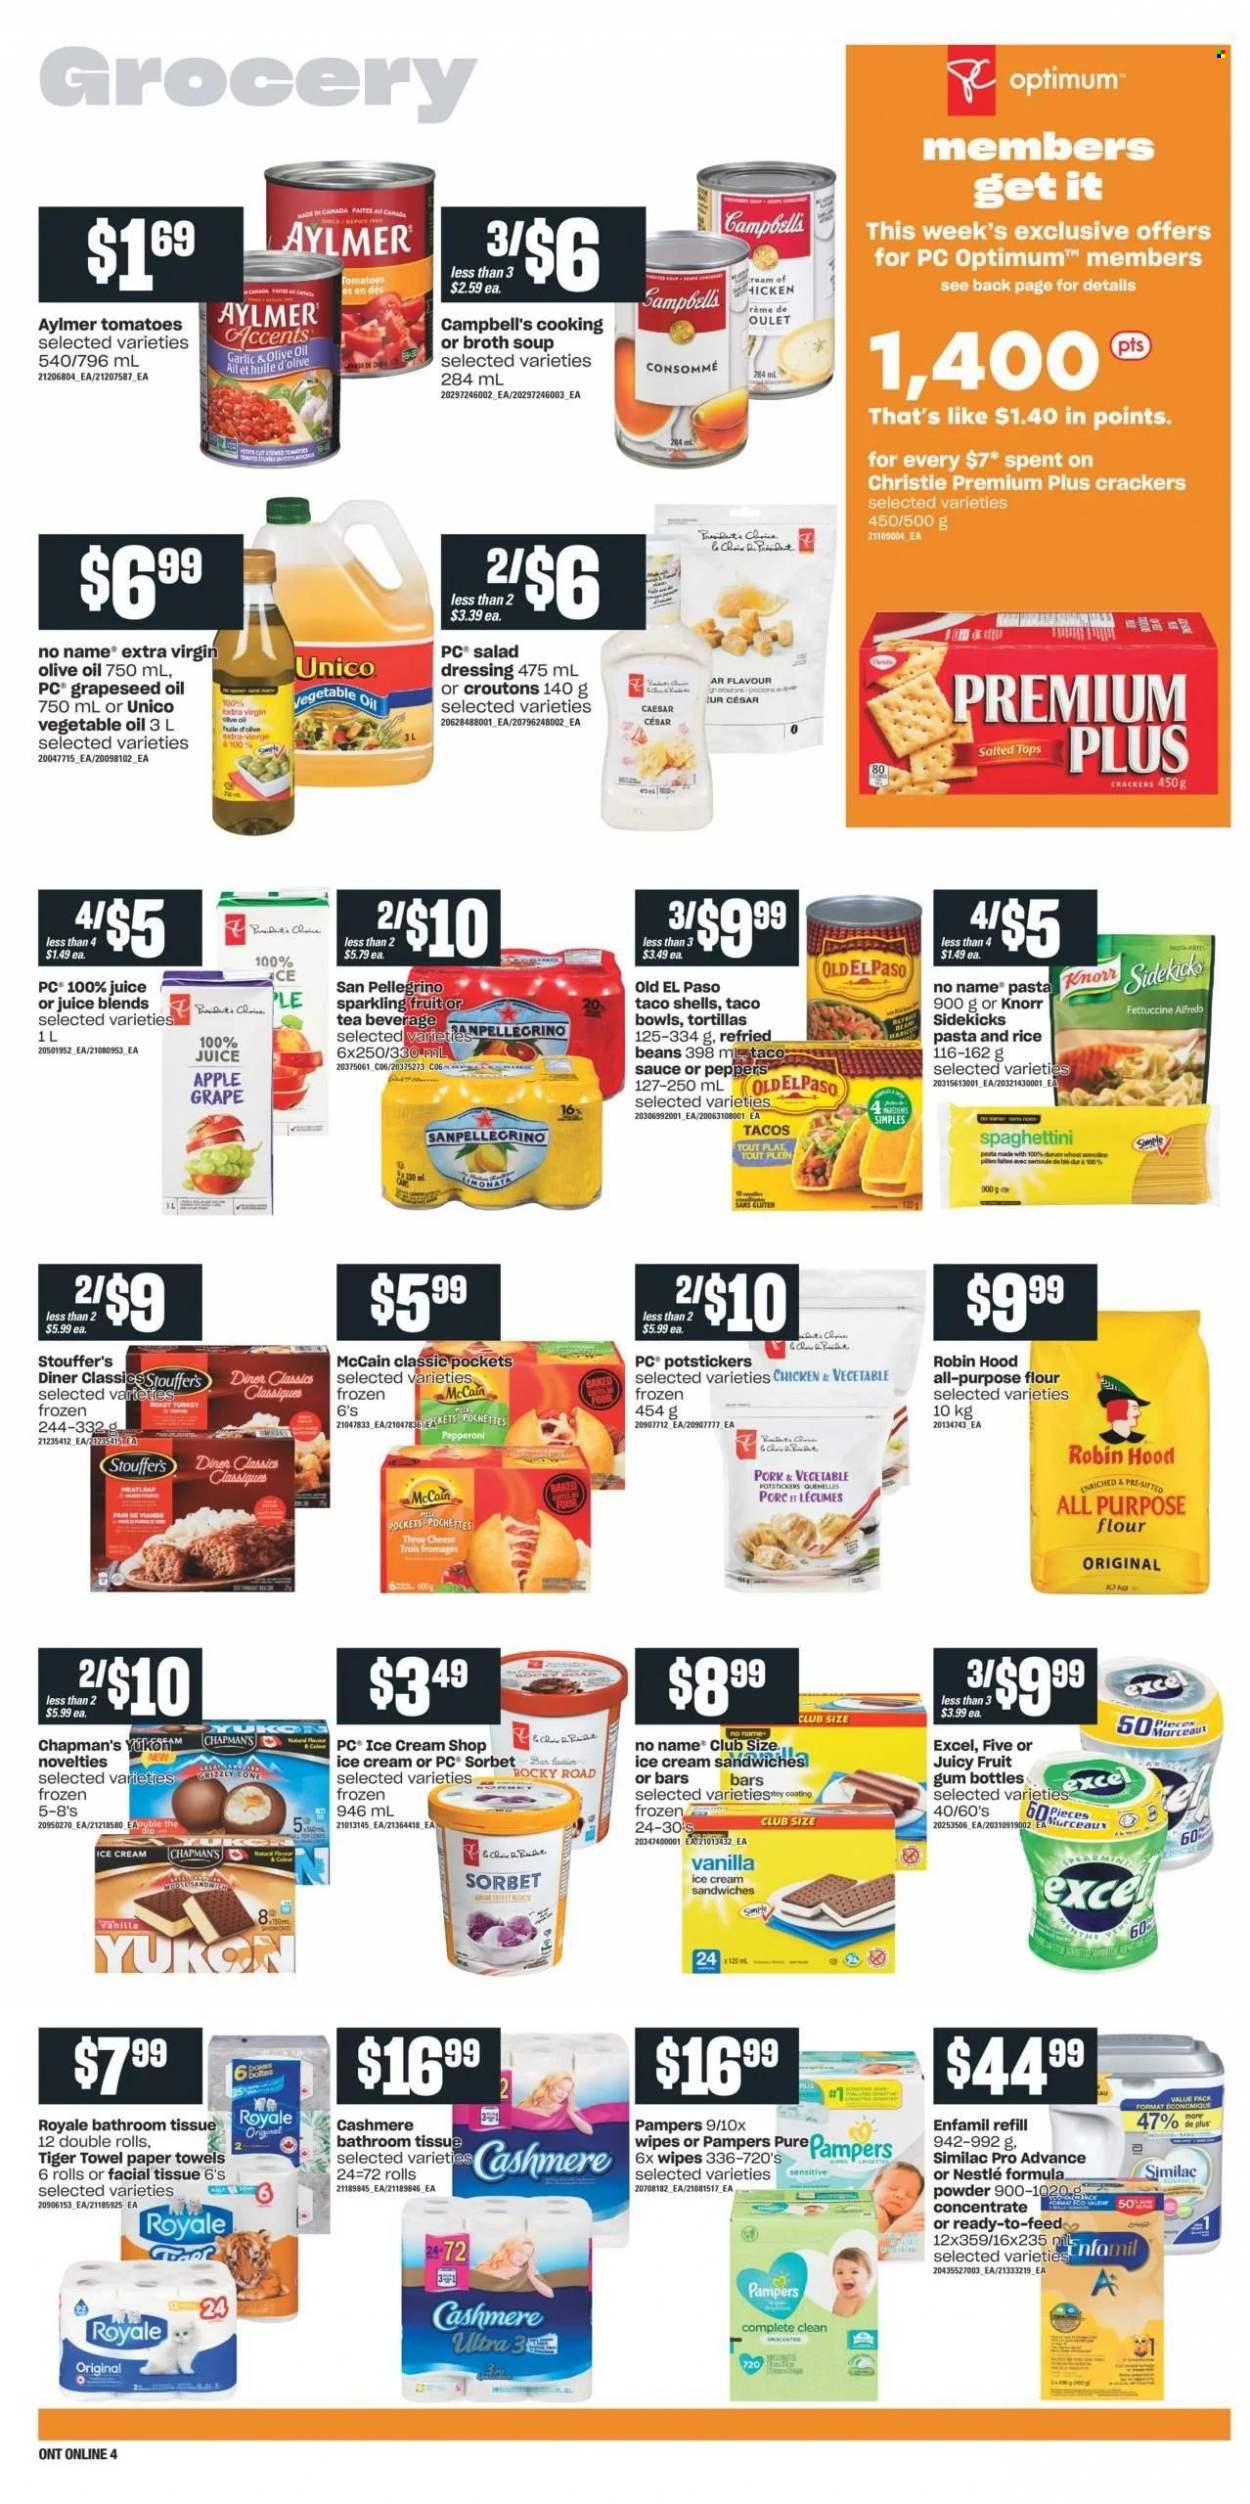 thumbnail - Independent Flyer - October 14, 2021 - October 20, 2021 - Sales products - tortillas, Old El Paso, tacos, beans, tomatoes, peppers, No Name, Campbell's, soup, pasta, pepperoni, ice cream, ice cream sandwich, Stouffer's, McCain, crackers, all purpose flour, croutons, broth, refried beans, rice, salad dressing, dressing, extra virgin olive oil, vegetable oil, olive oil, oil, grape seed oil, juice, San Pellegrino, tea, Enfamil, Similac, wipes, bath tissue, kitchen towels, paper towels, Optimum, Knorr, Nestlé, Pampers. Page 8.